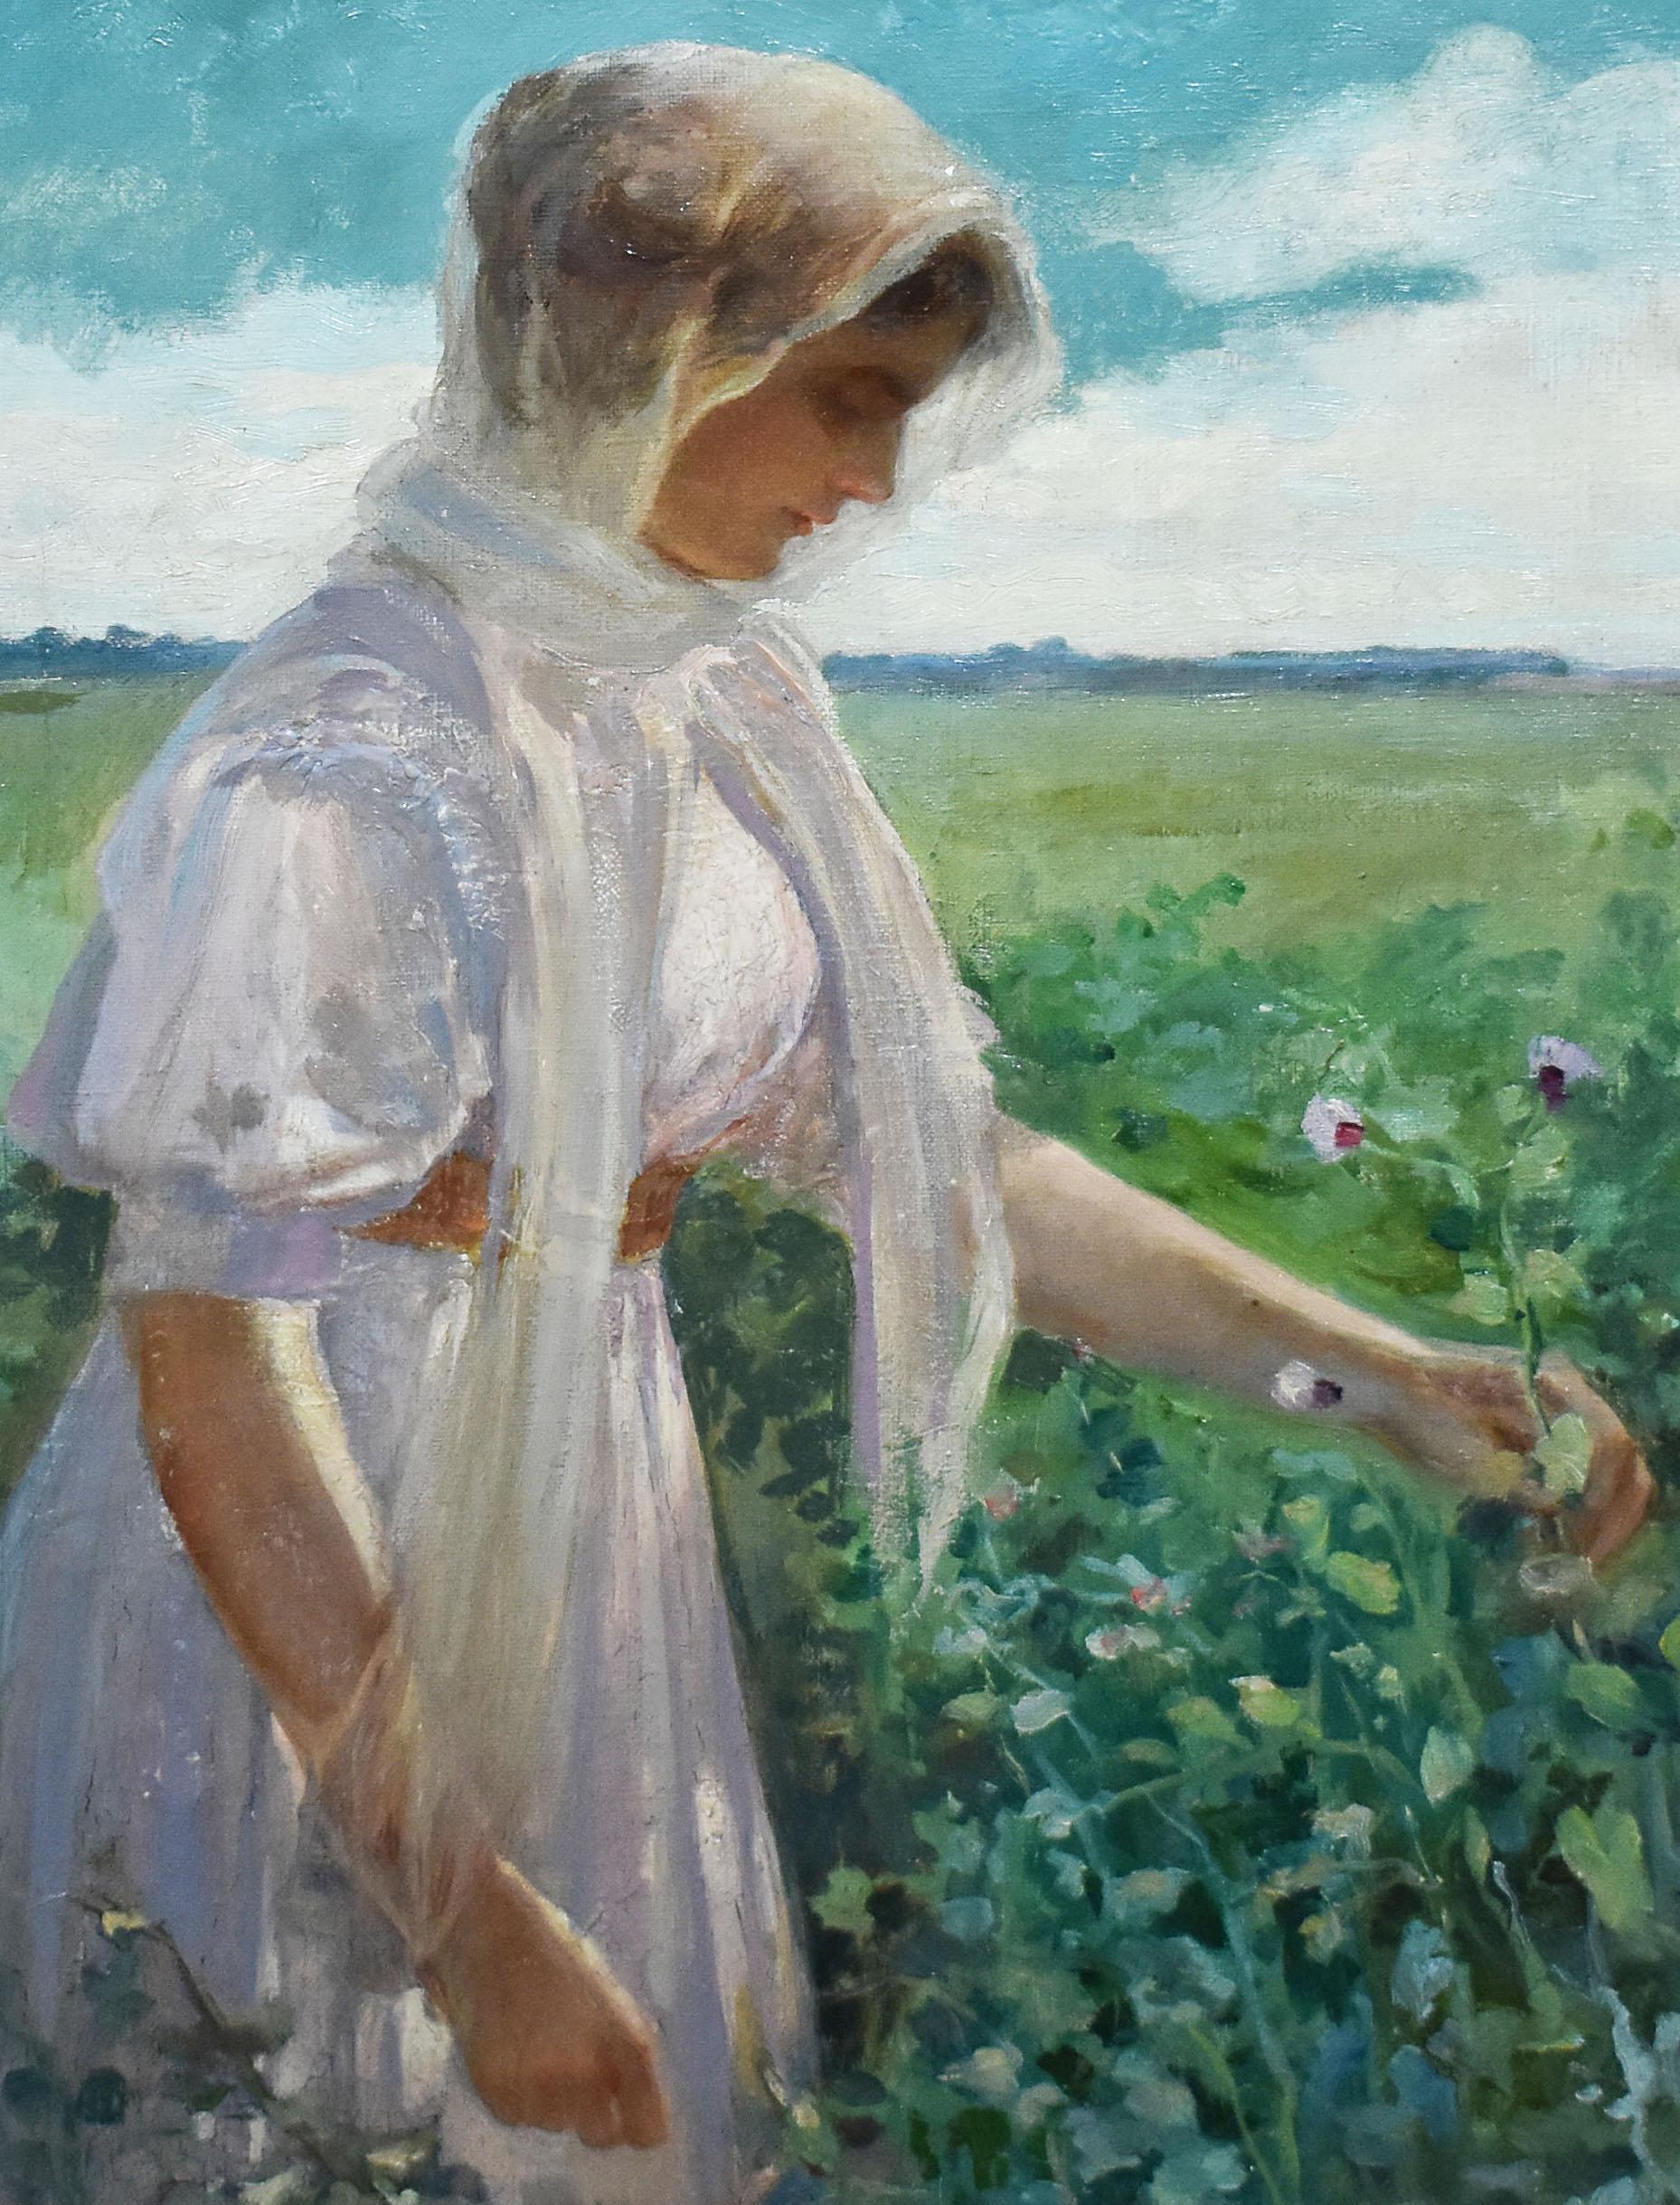 Impressionist landscape painting with a young woman picking flowers.   Oil on canvas, circa 1913.  Signed lower right illegibly.  Displayed in a period impressionist frame.  Image size, 14